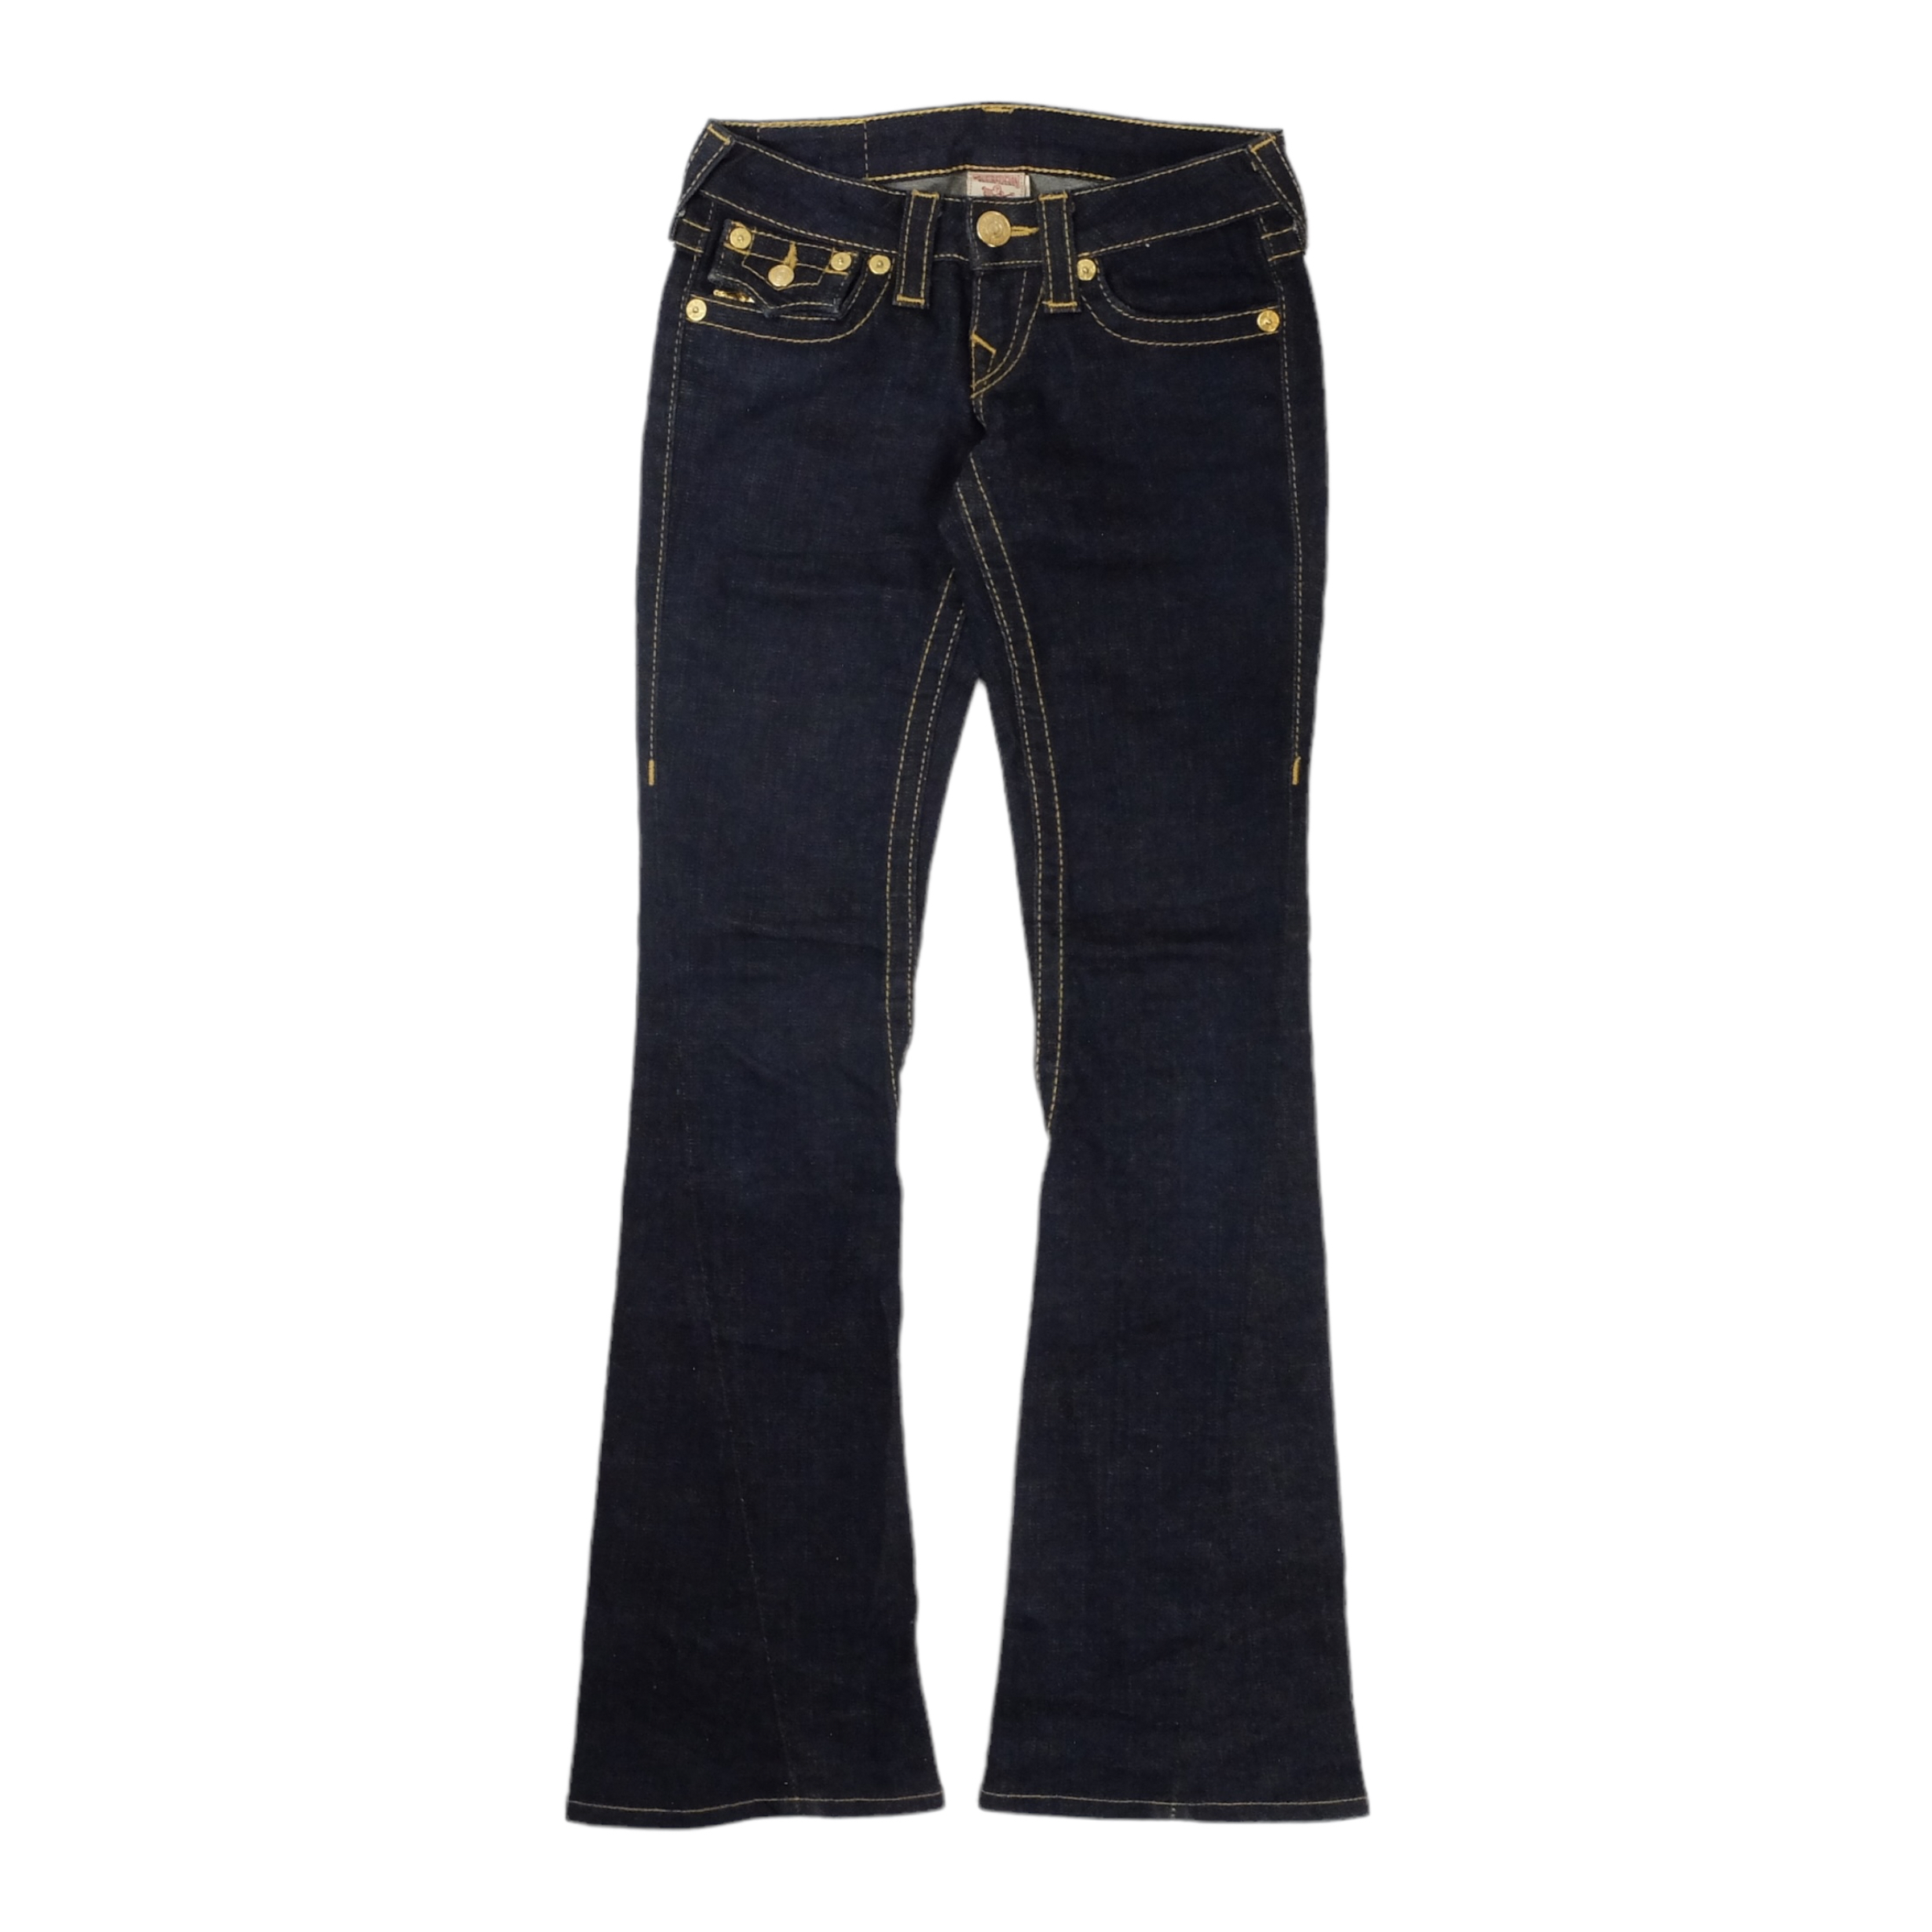 True Religion Gold Sequined Joey Jeans – FIFTH